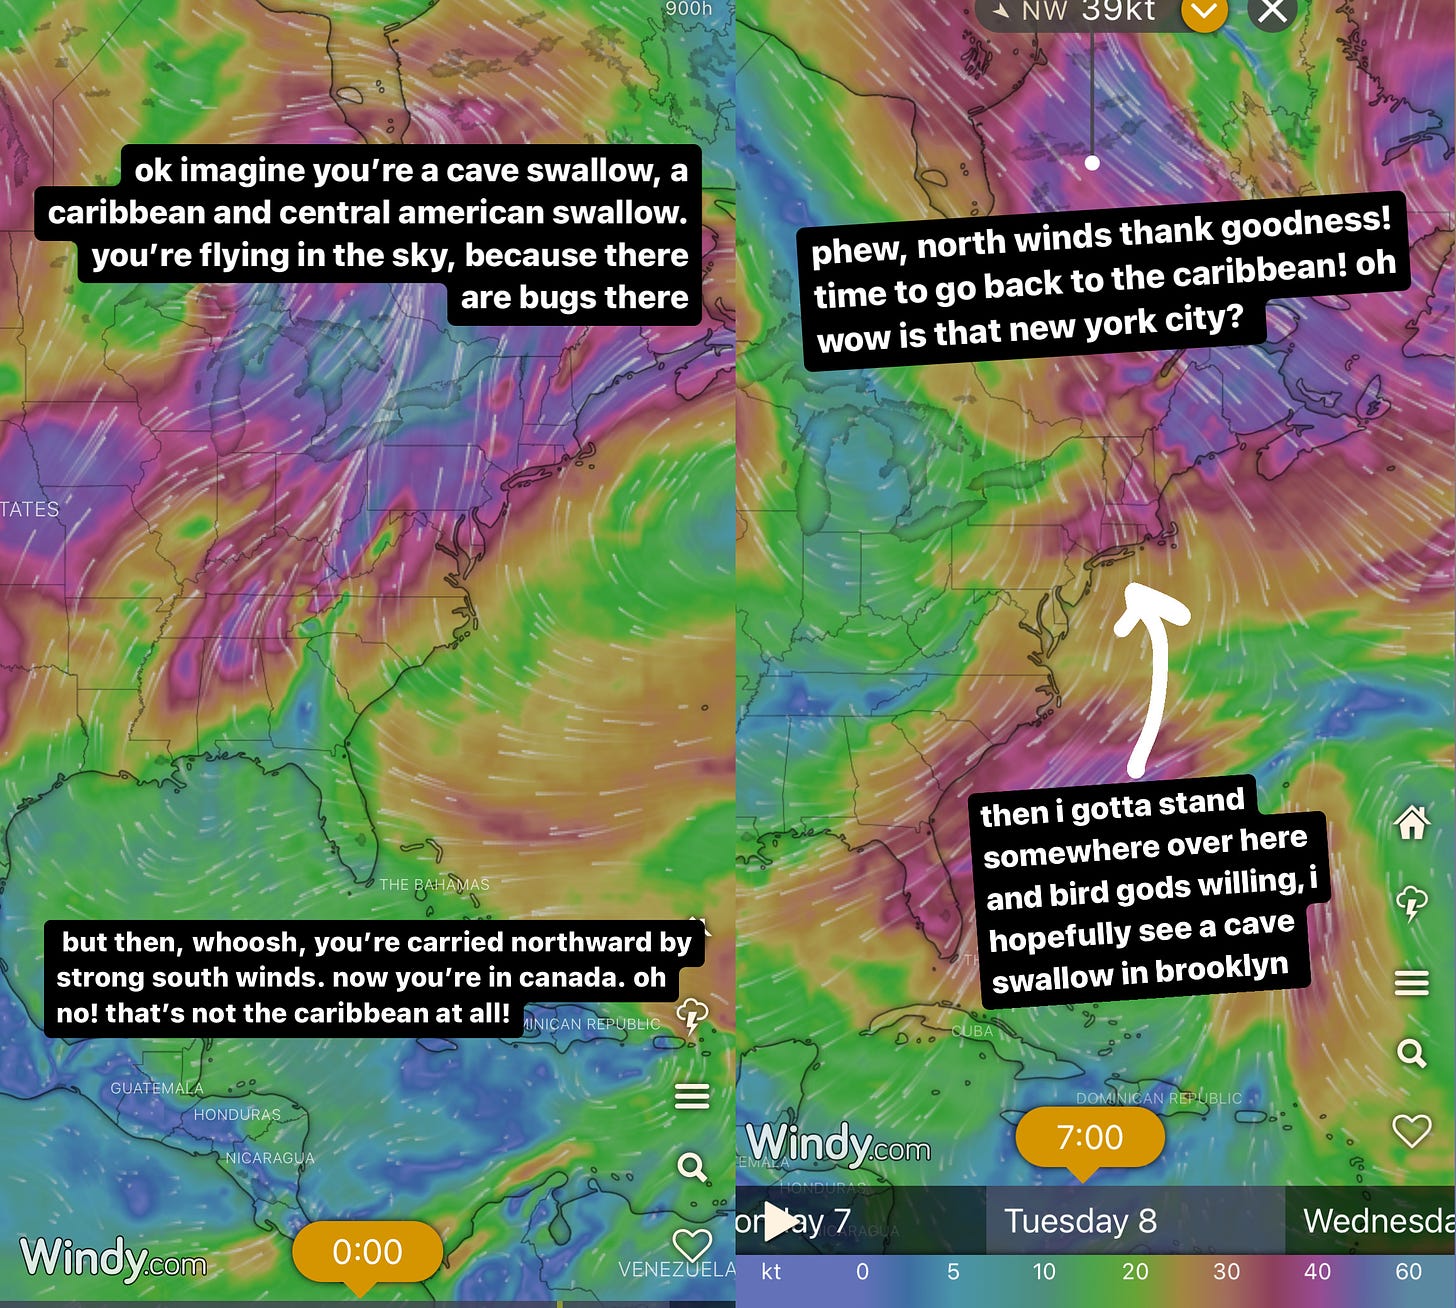 two wind maps of the eastern united states with superimposed text. the left map shows strong winds coming from the southwest, with the caption "ok, imagine you're a cave swallow, a caribbean and central american swallow. you're flying in the sky, because there are bugs there. but then, whoosh, you're carried northward by strong south winds. now you're in canada. oh no! that's not the caribbeam at all!" then the righthand map shows the wind coming from the northwest with the caption "phew, north winds thank goodness! time to go back to the caribbean! oh wow is that new york city?" then, under an arrow pointing long island, "then i gotta stand somewhere over here, and bird gods willing, i hopefully see a cave swallow in brooklyn"